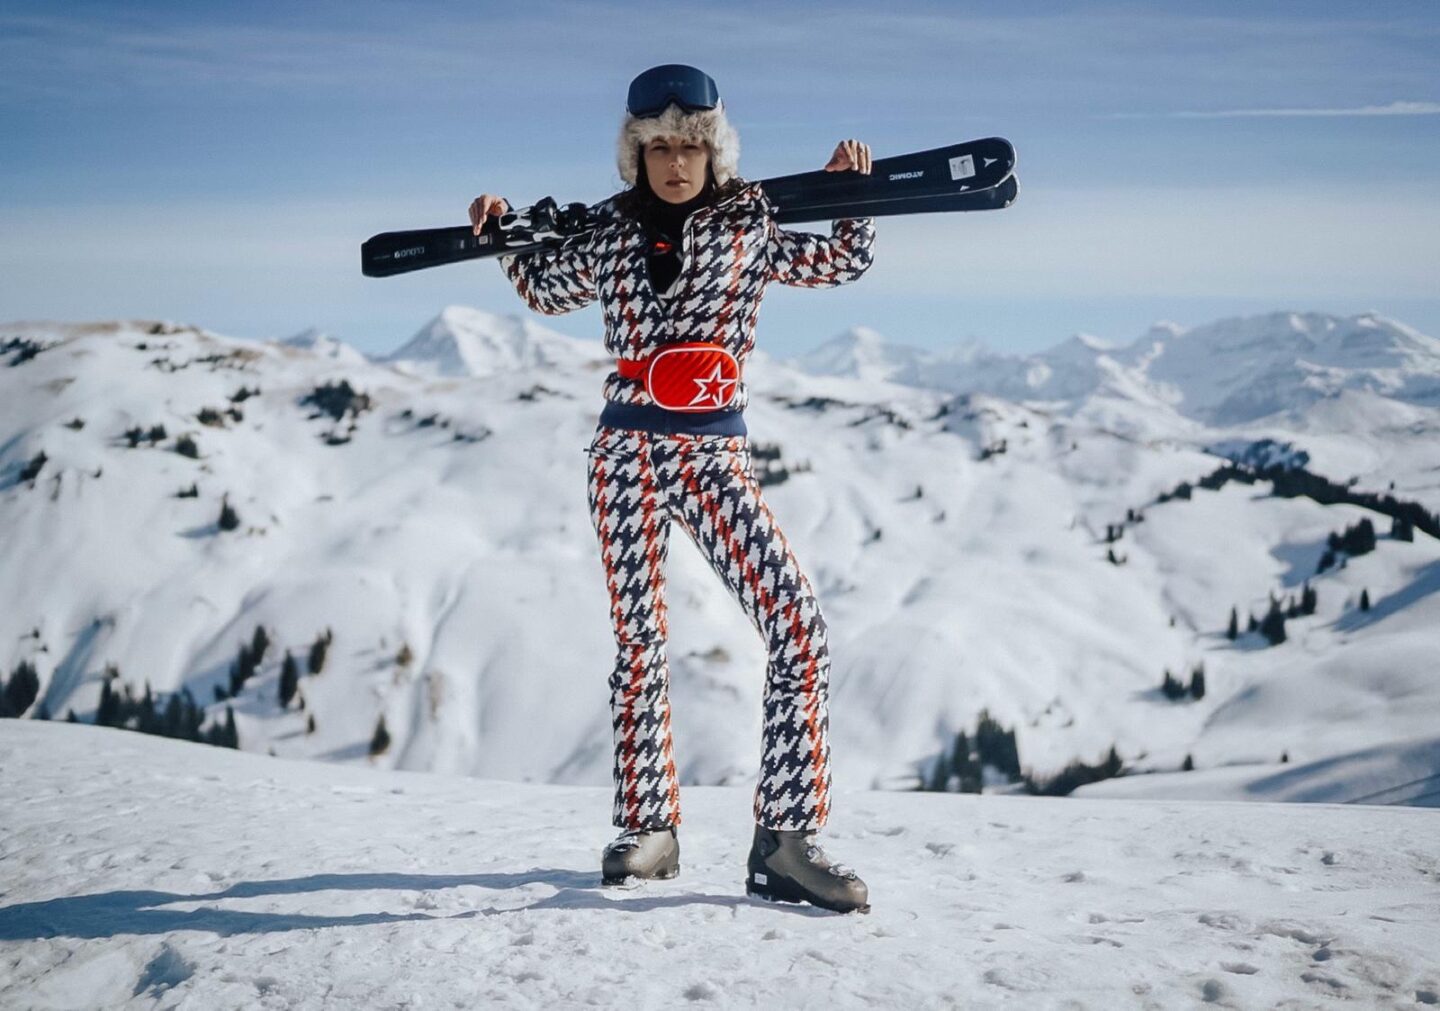 Ski Fashion 2017: The best looks for your winter holiday